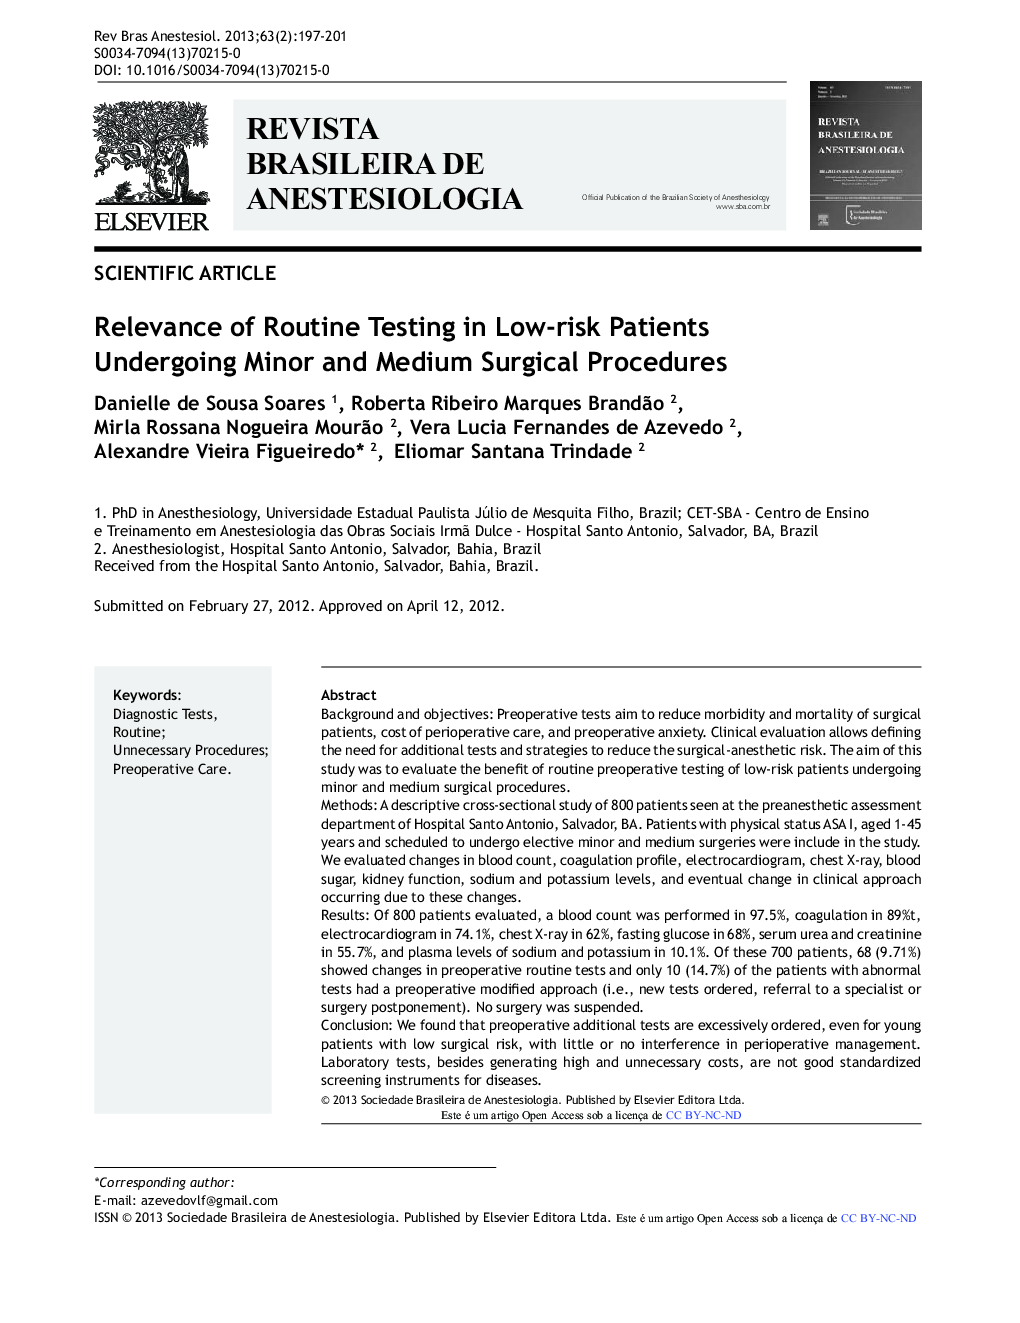 Relevance of Routine Testing in Low-risk Patients Undergoing Minor and Medium Surgical Procedures